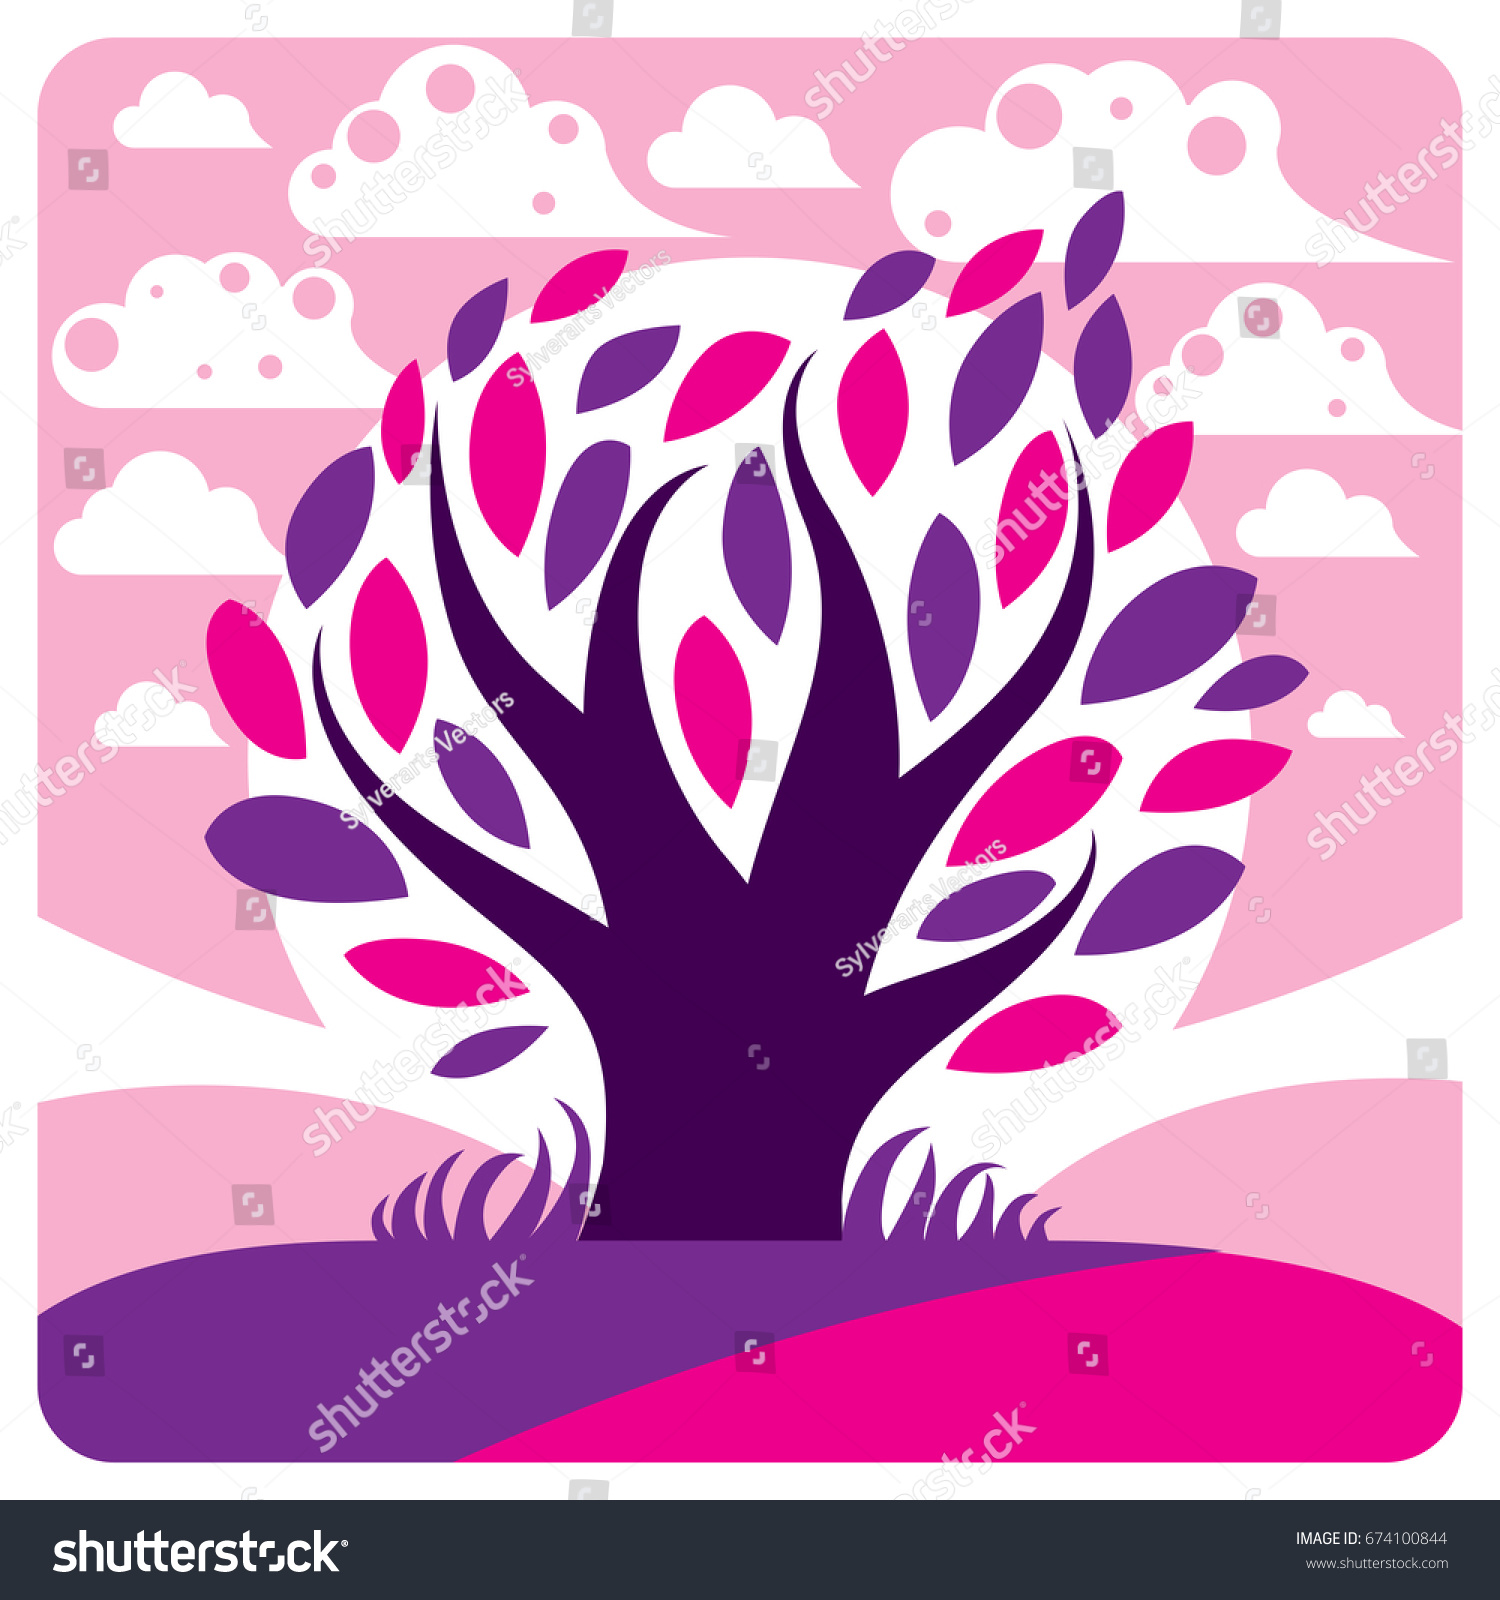 Art Vector Graphic Illustration Stylized Tree Stock Vector Royalty Free 674100844